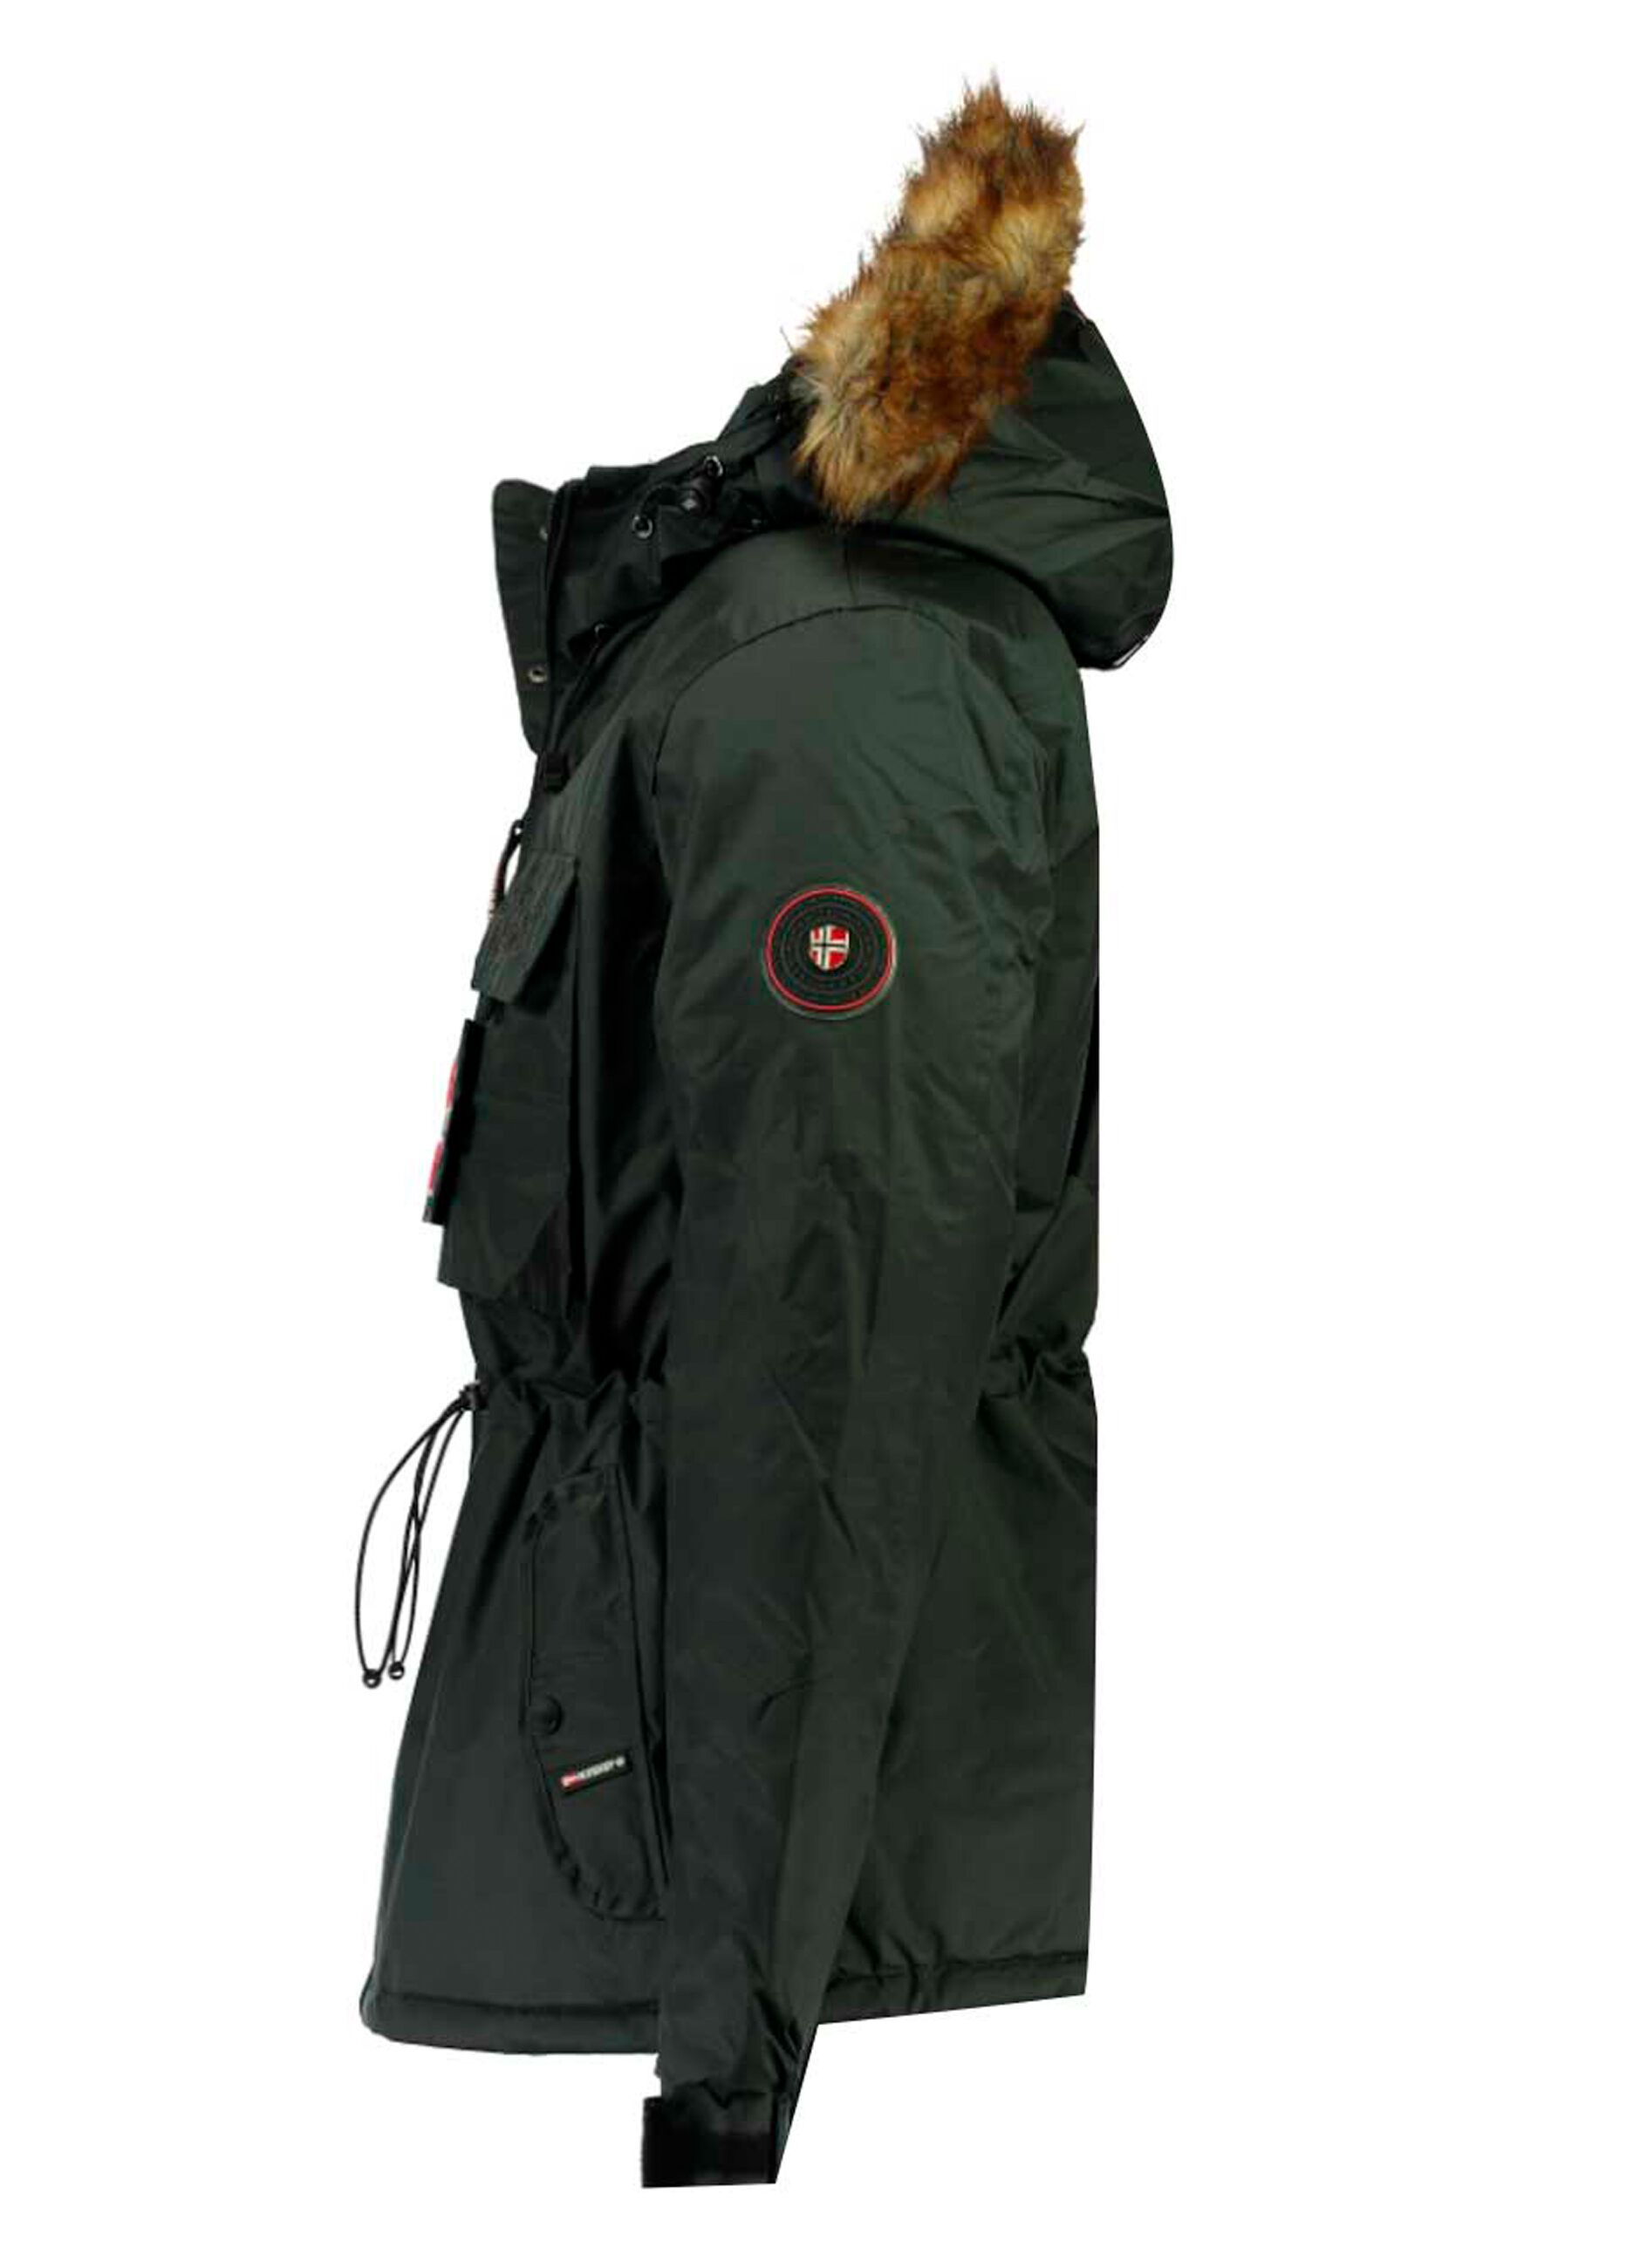 Parka con cremallera Geographical Norway